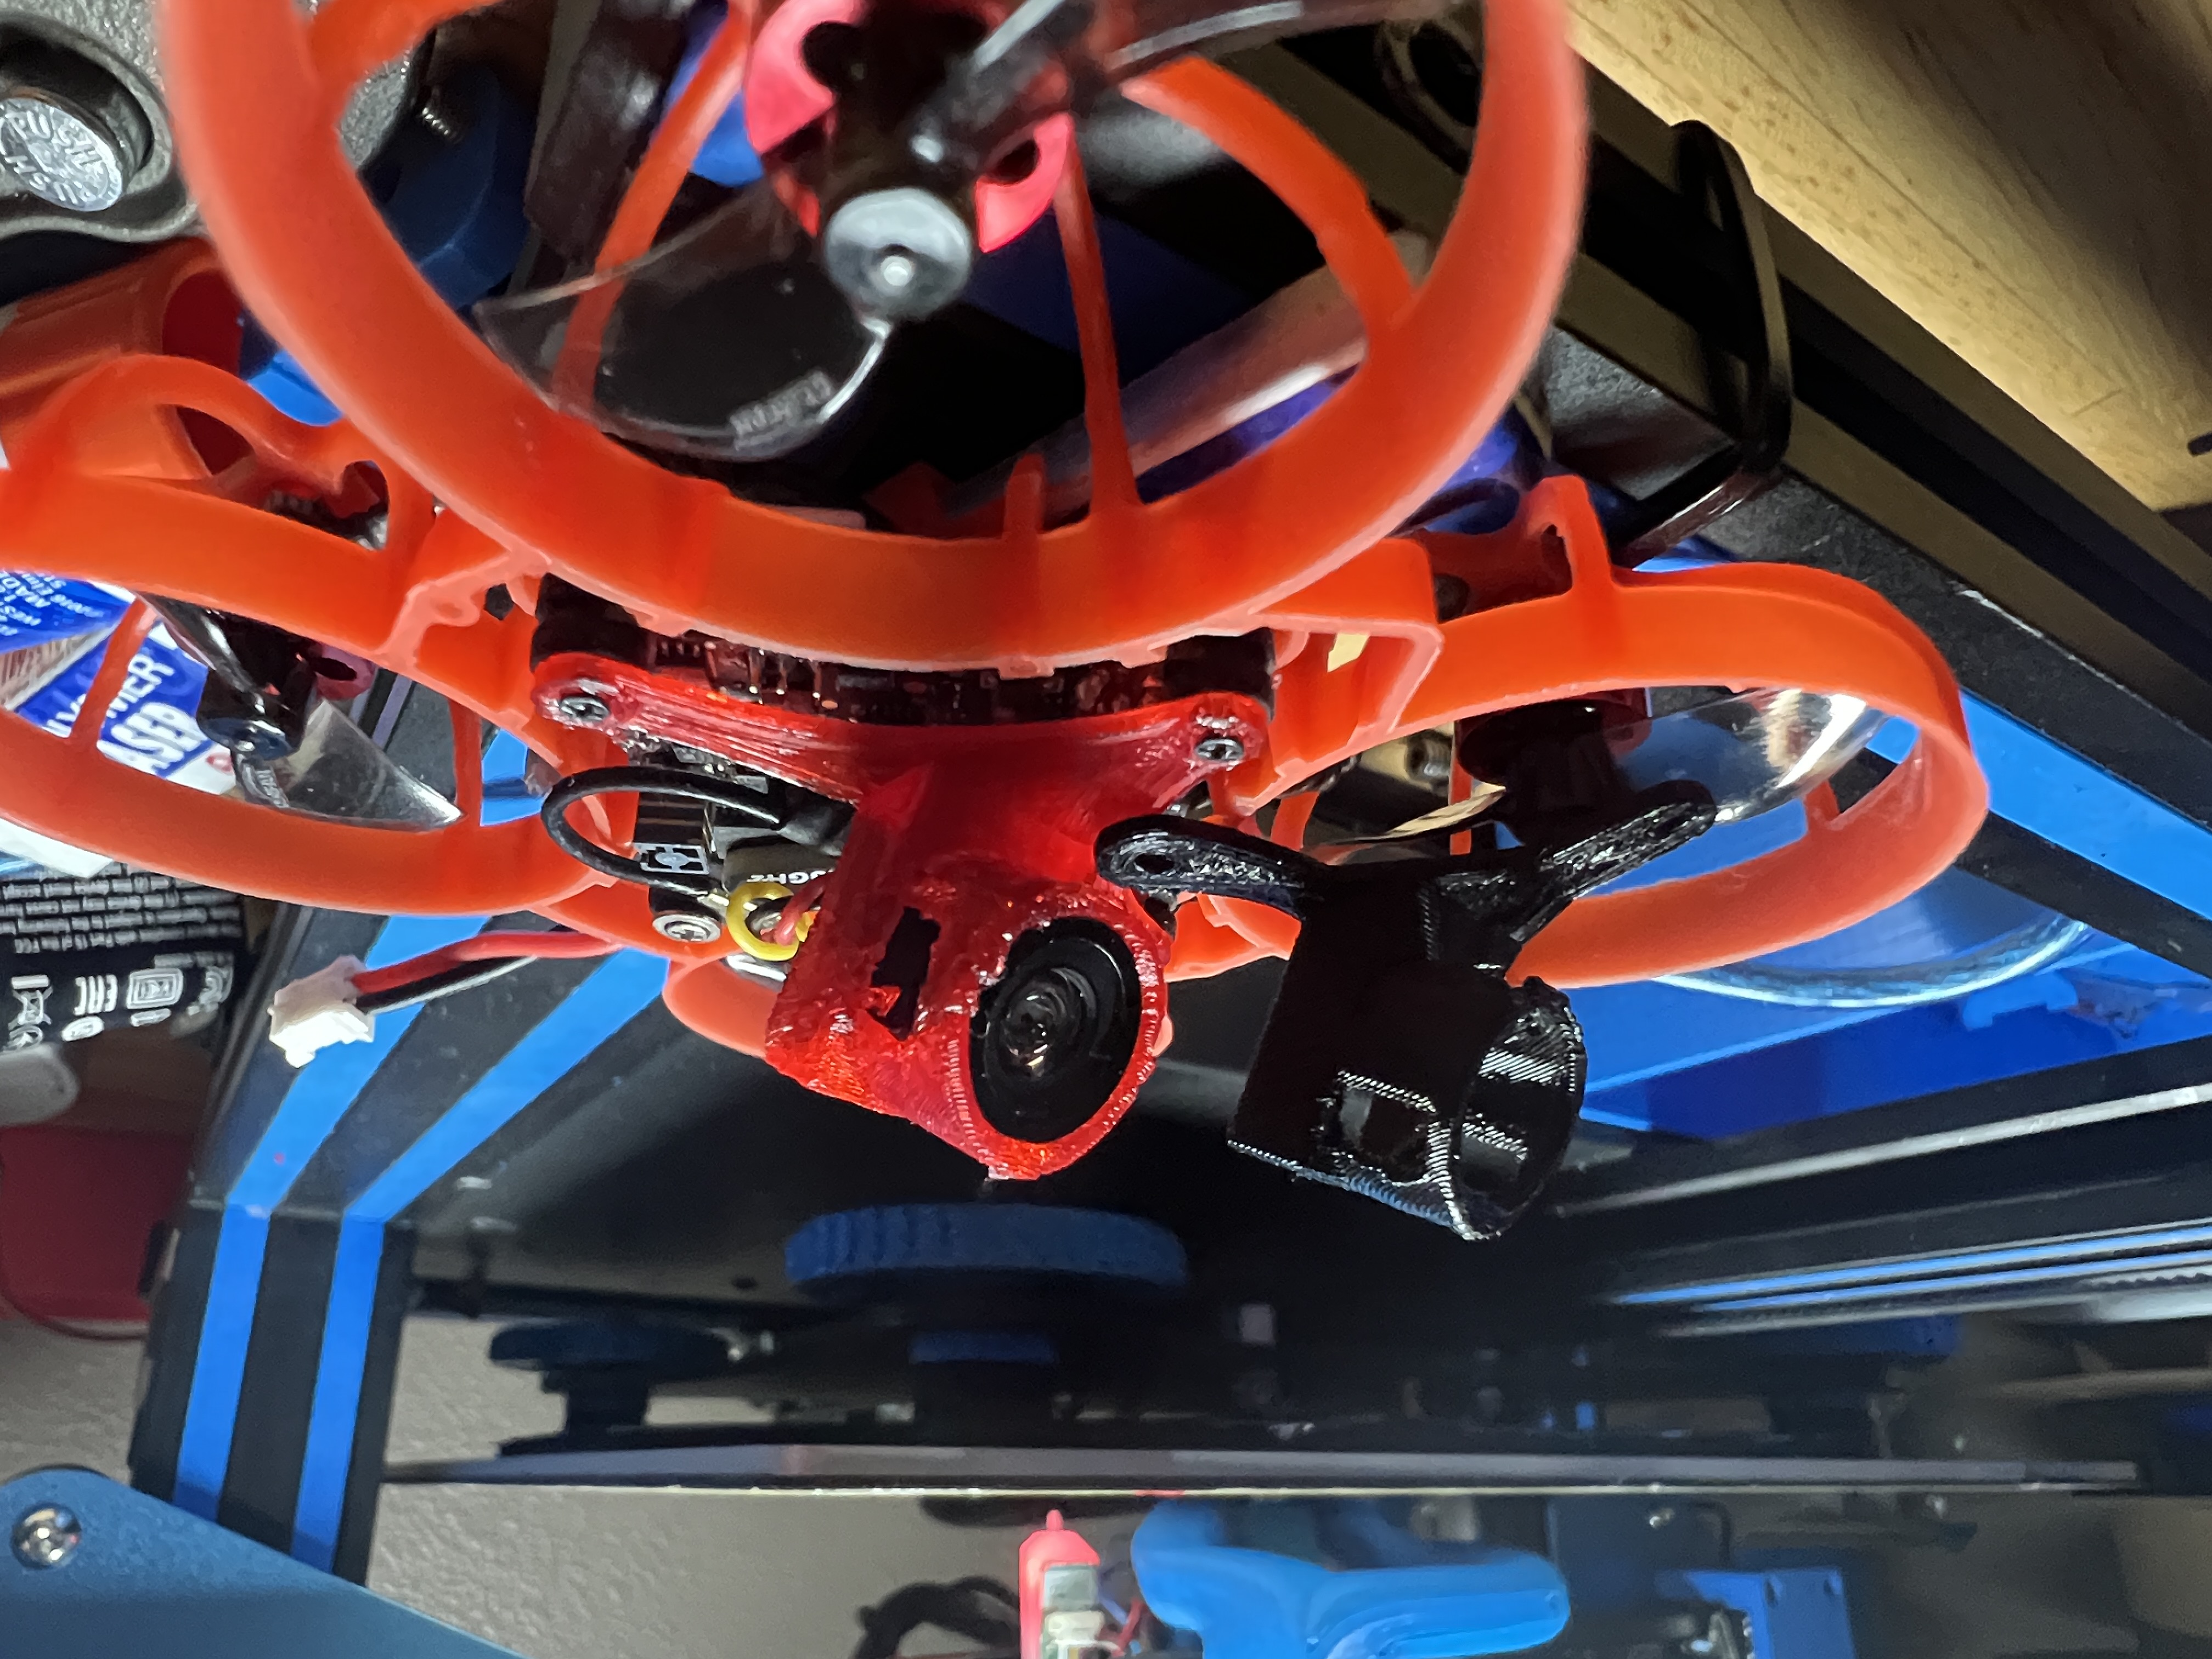 Tiny Whoop Camera Mounts - Caddx Ant, Foxeer Pico, FX965TW Pitch